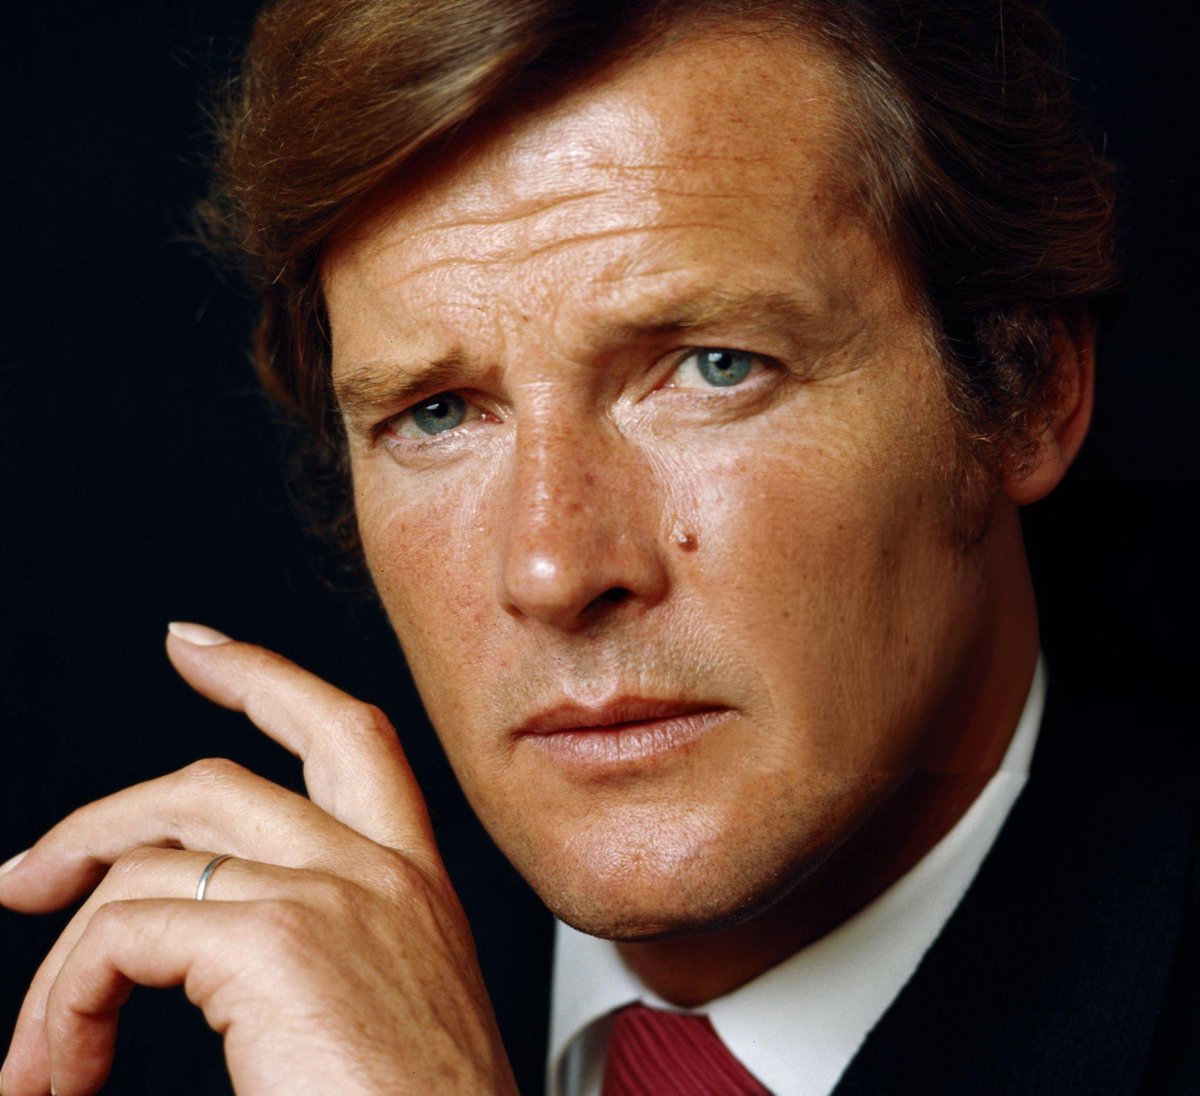 In Remembrance of Sir Roger Moore. Born | October 14, 1927 in Stockwell, London, England, UK. Died | May 23, 2017 (aged 89) in Crans-Montana, Valais, Switzerland. Photo | Sir Roger Moore, 1971 © Lichfield Archive. #SirRogerMoore #RogerMoore